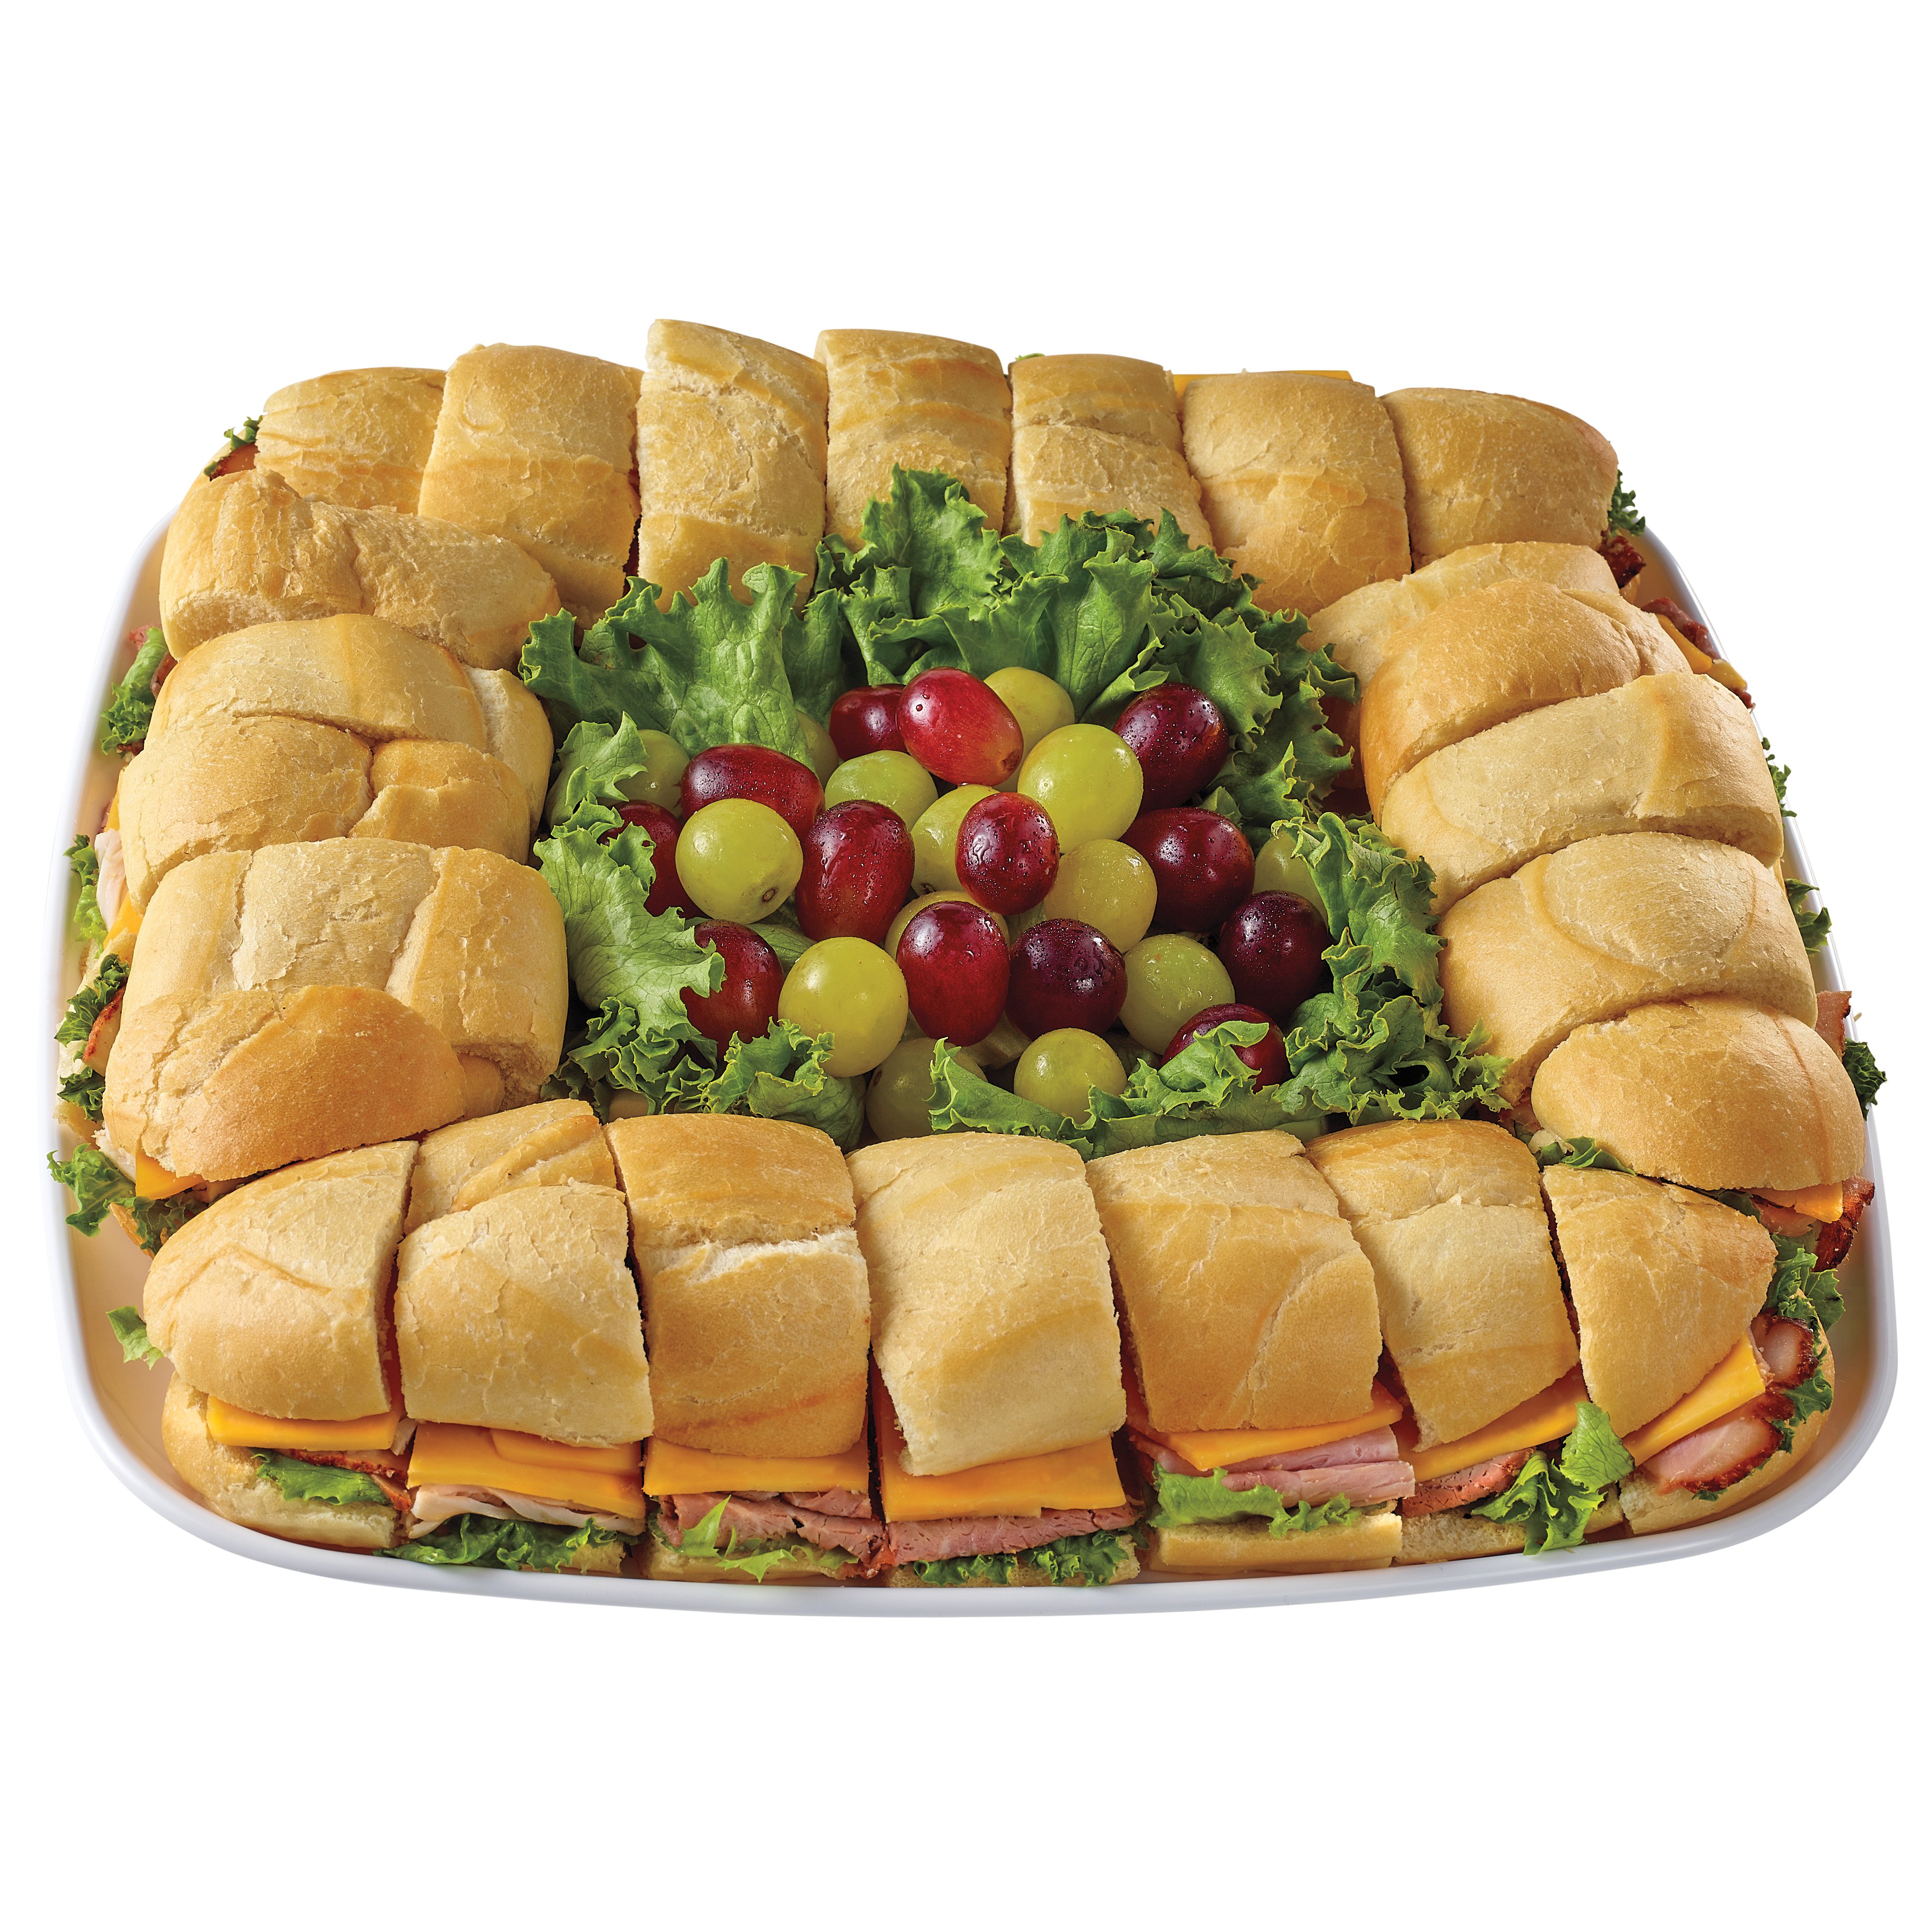 List 100+ Images How To Display Sandwiches On A Platter Superb